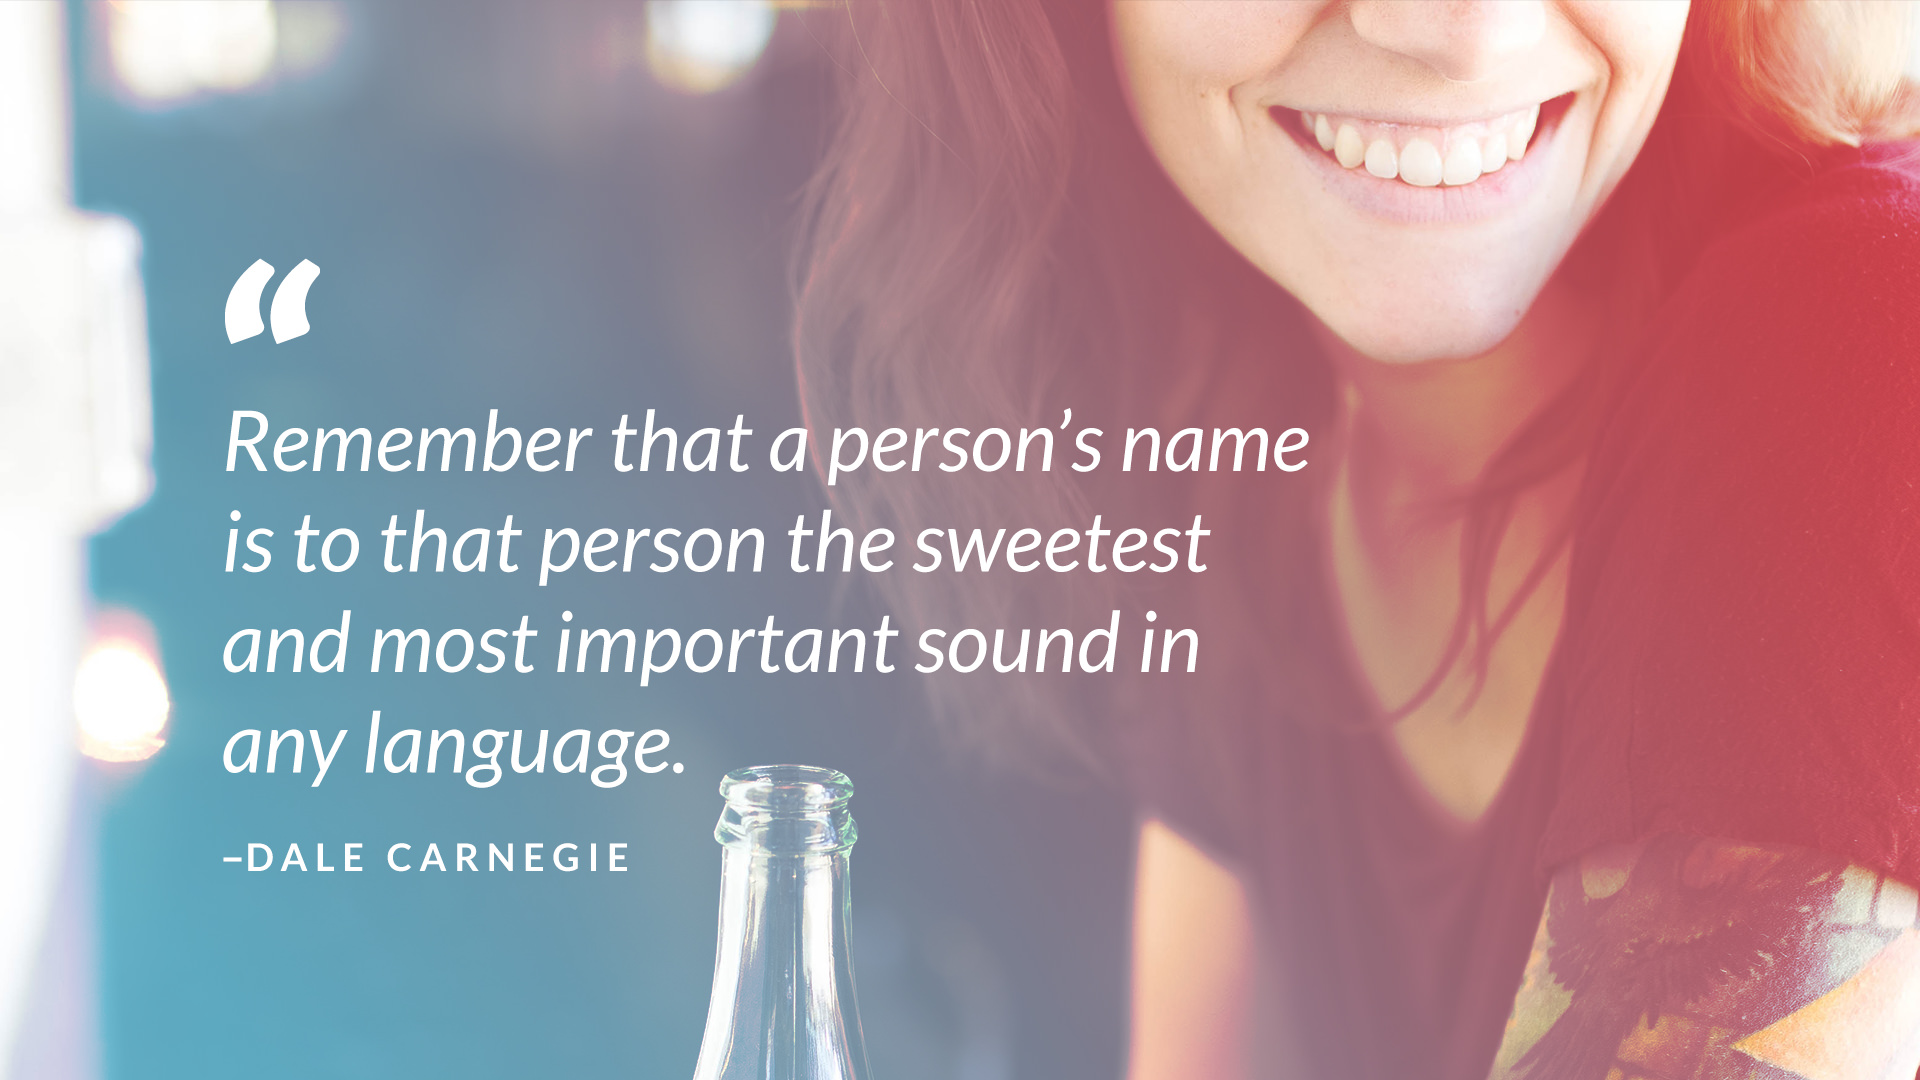 dale carnegie name quote